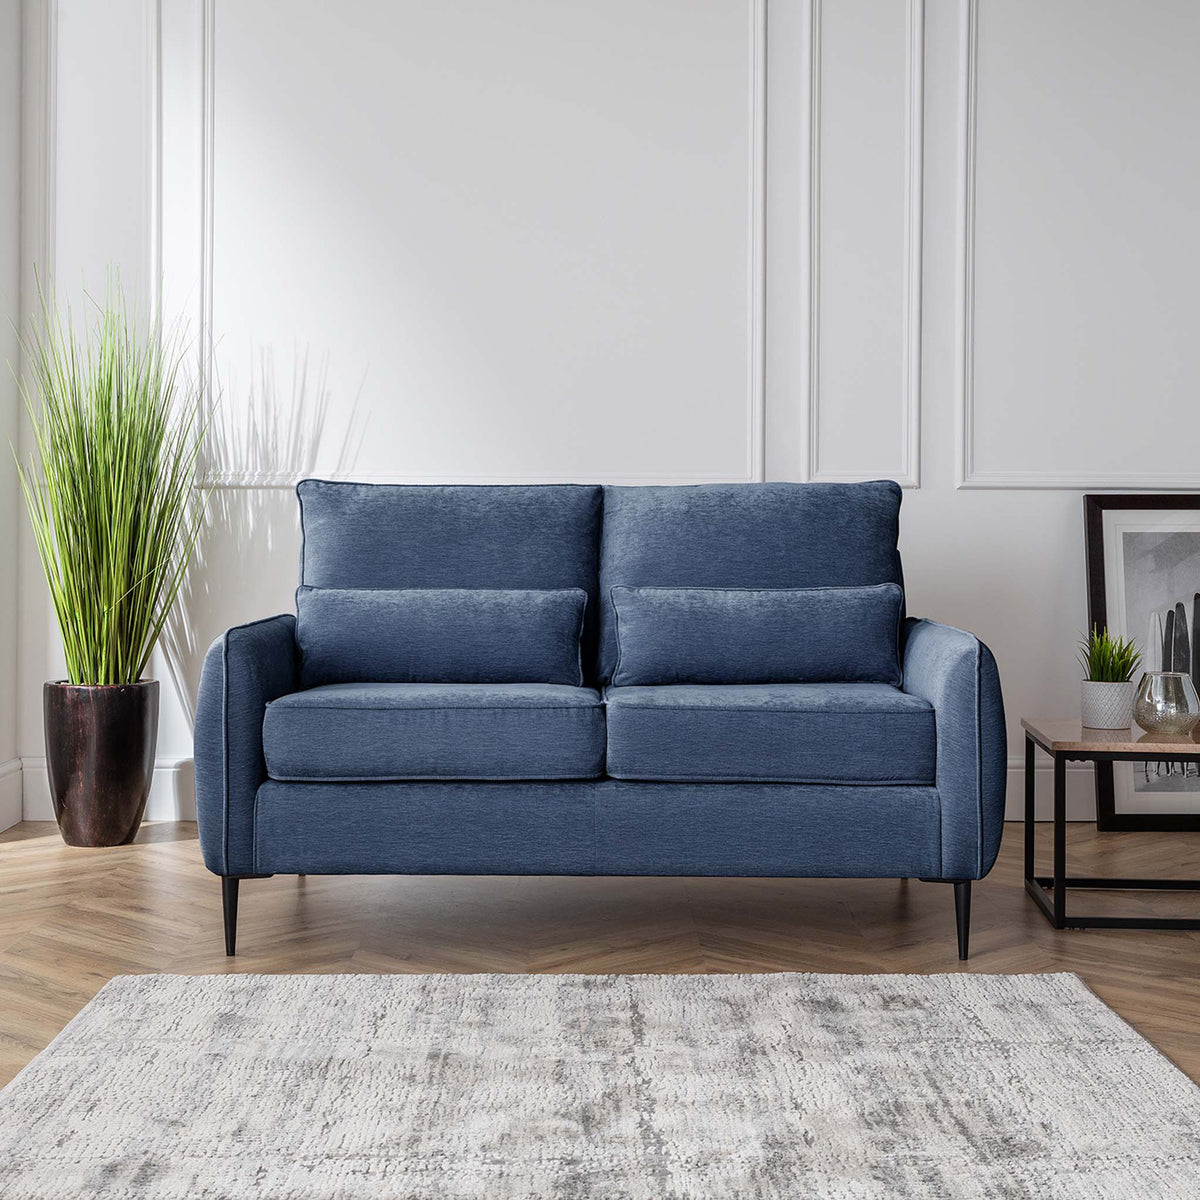 Oswald Navy Blue 2 Seater Sofa for living room